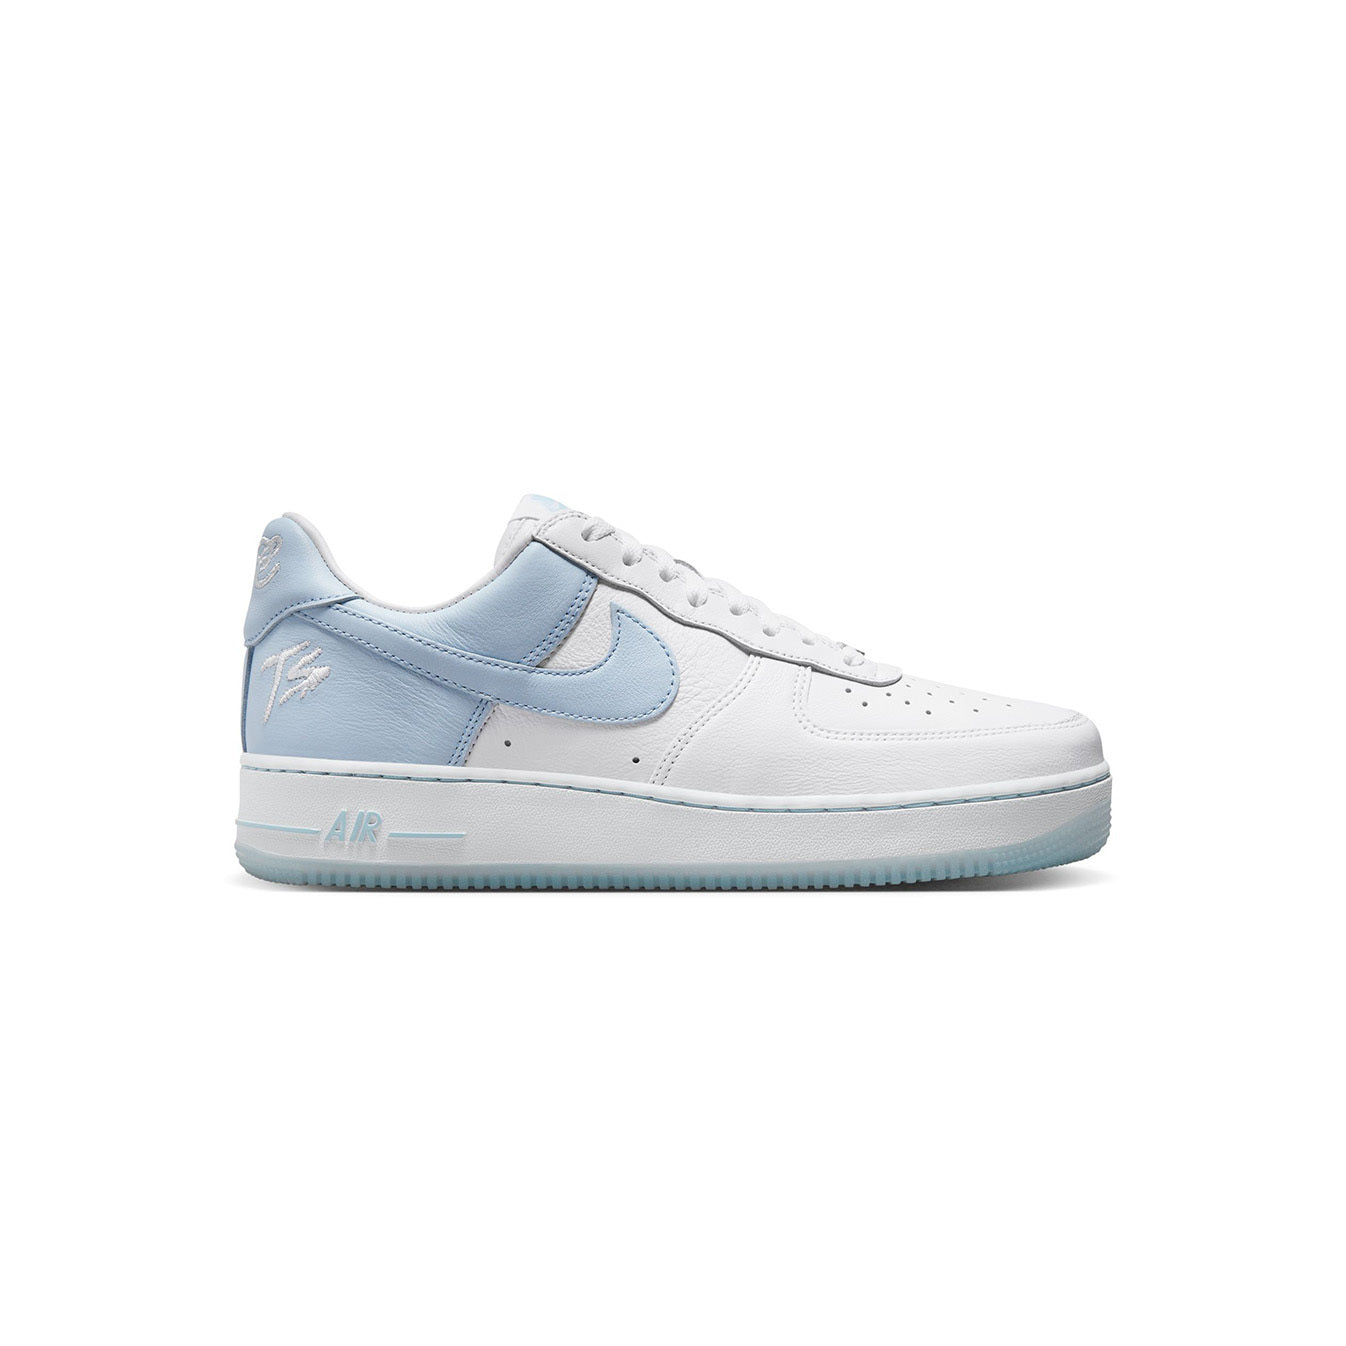 Terror Squad x Nike Air Force 1 Low – CNCPTS